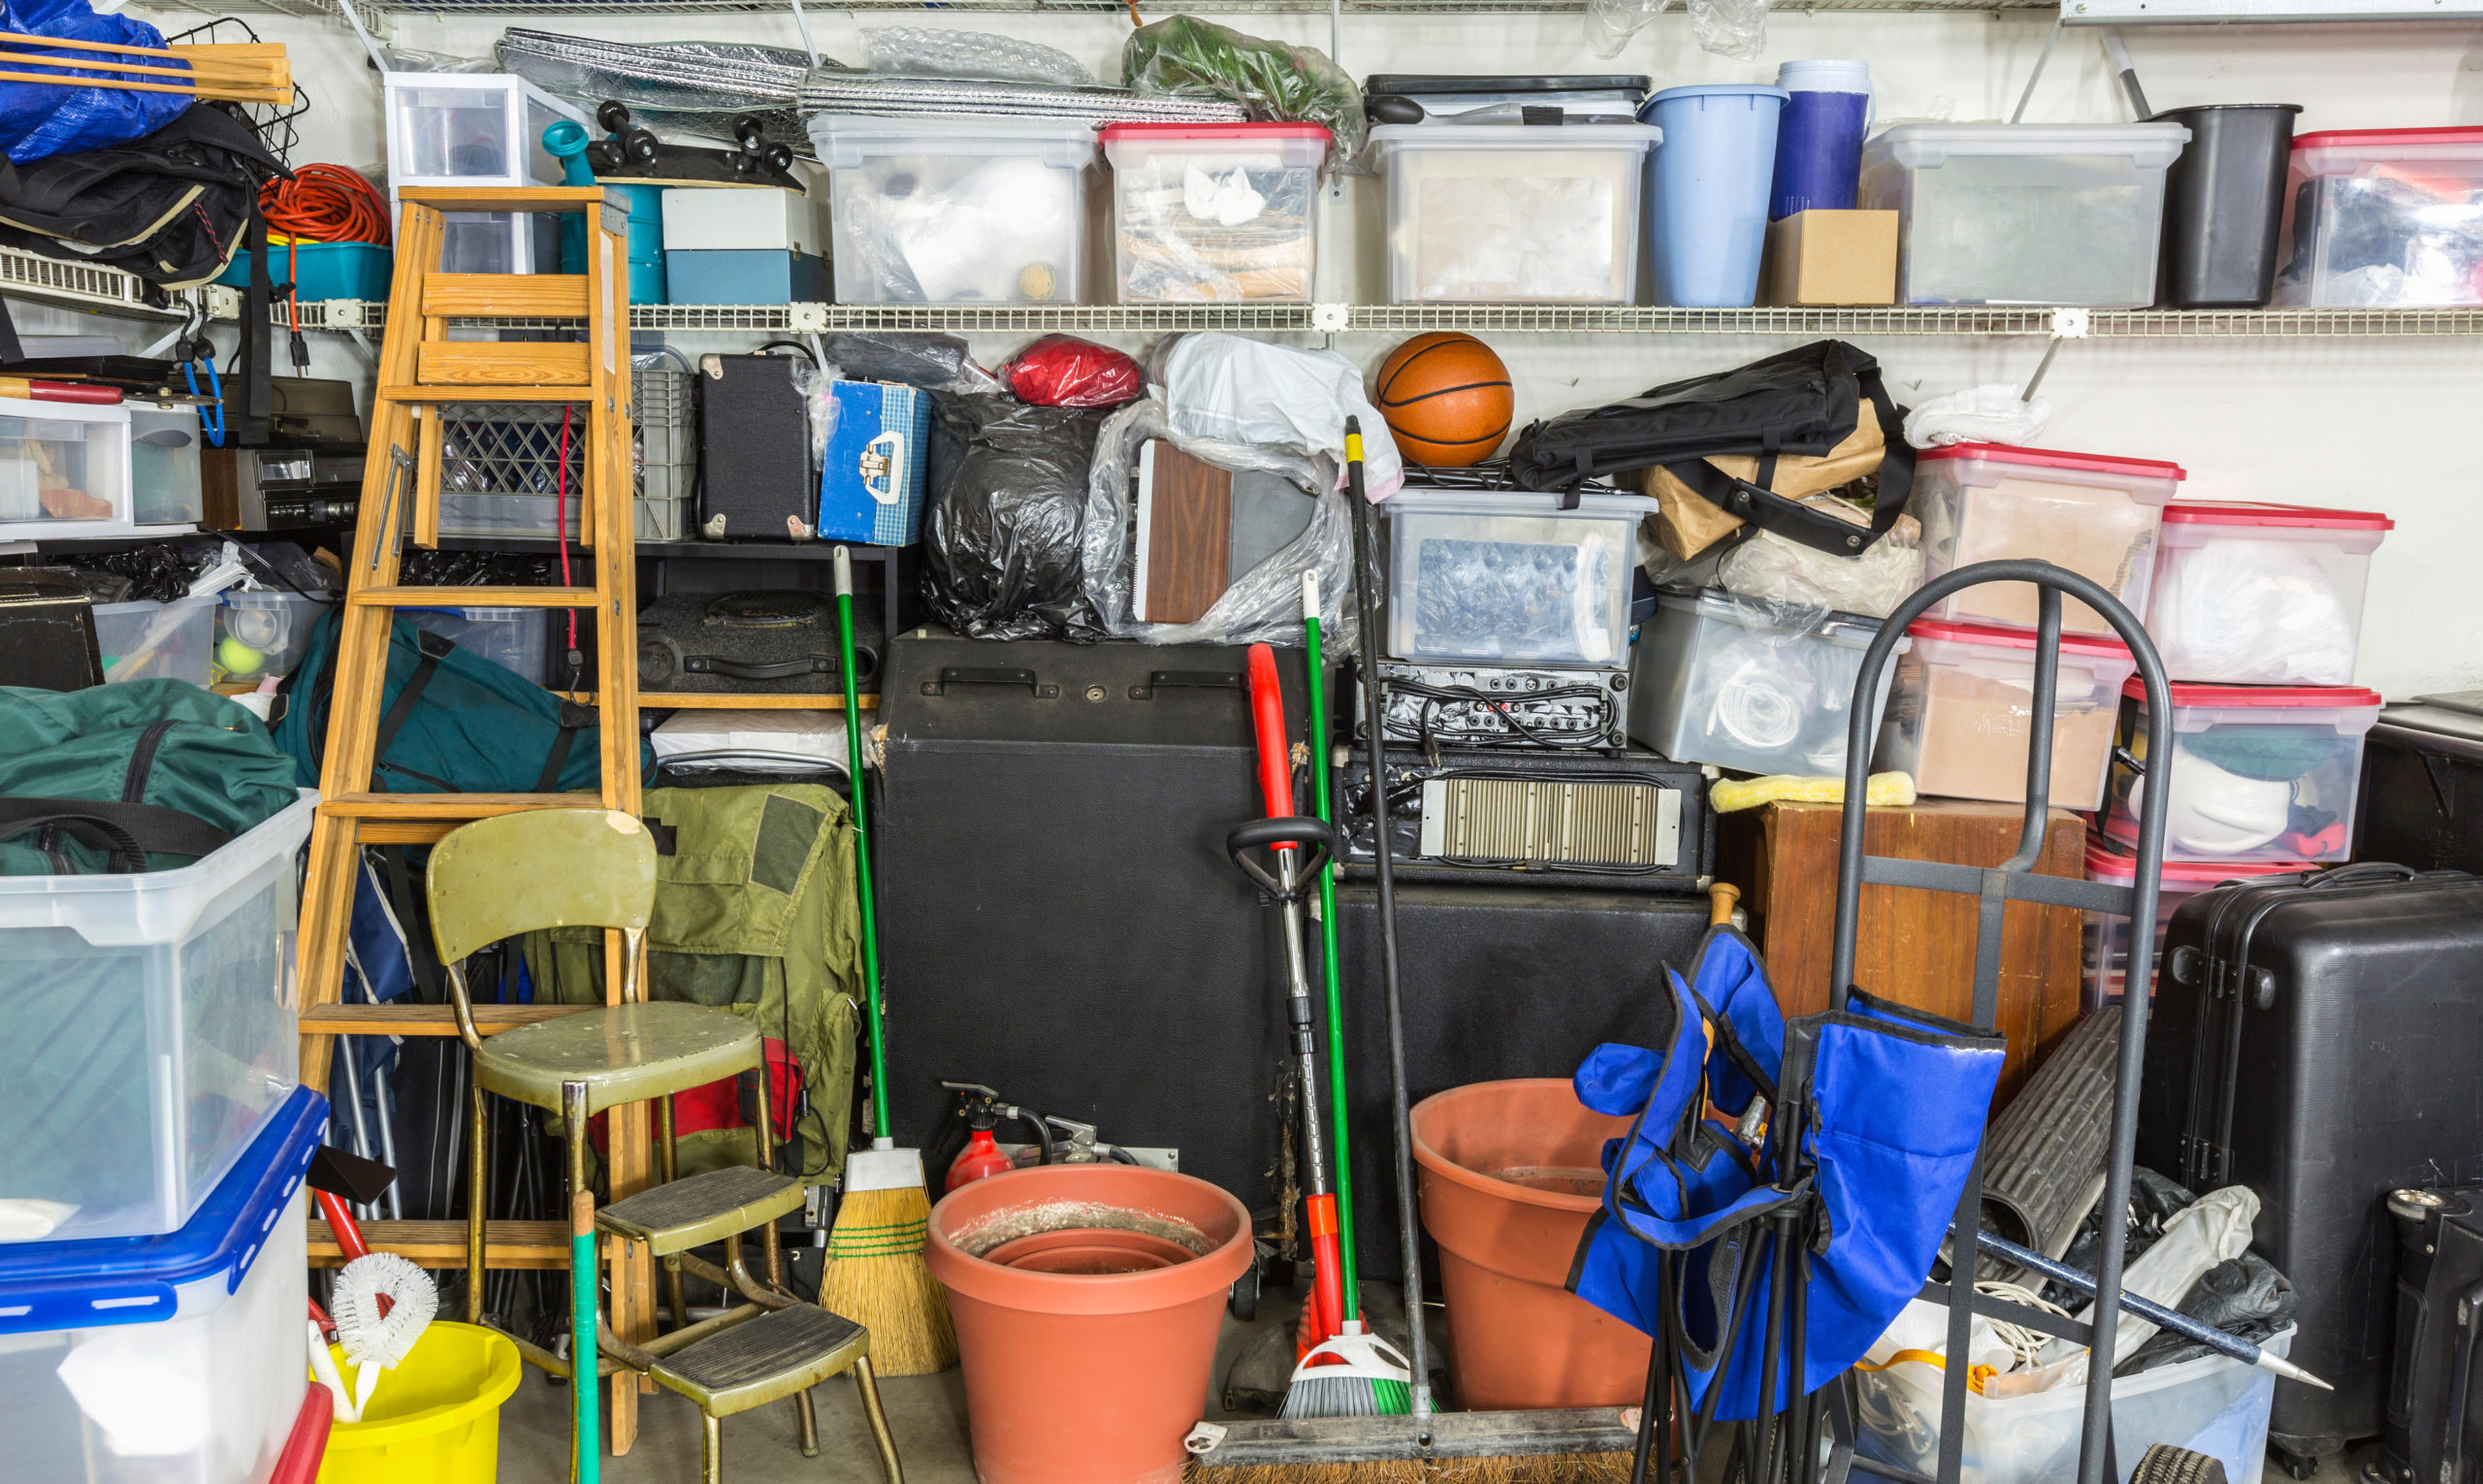 A messy garage full of items ready for the Junk Force team to clean out